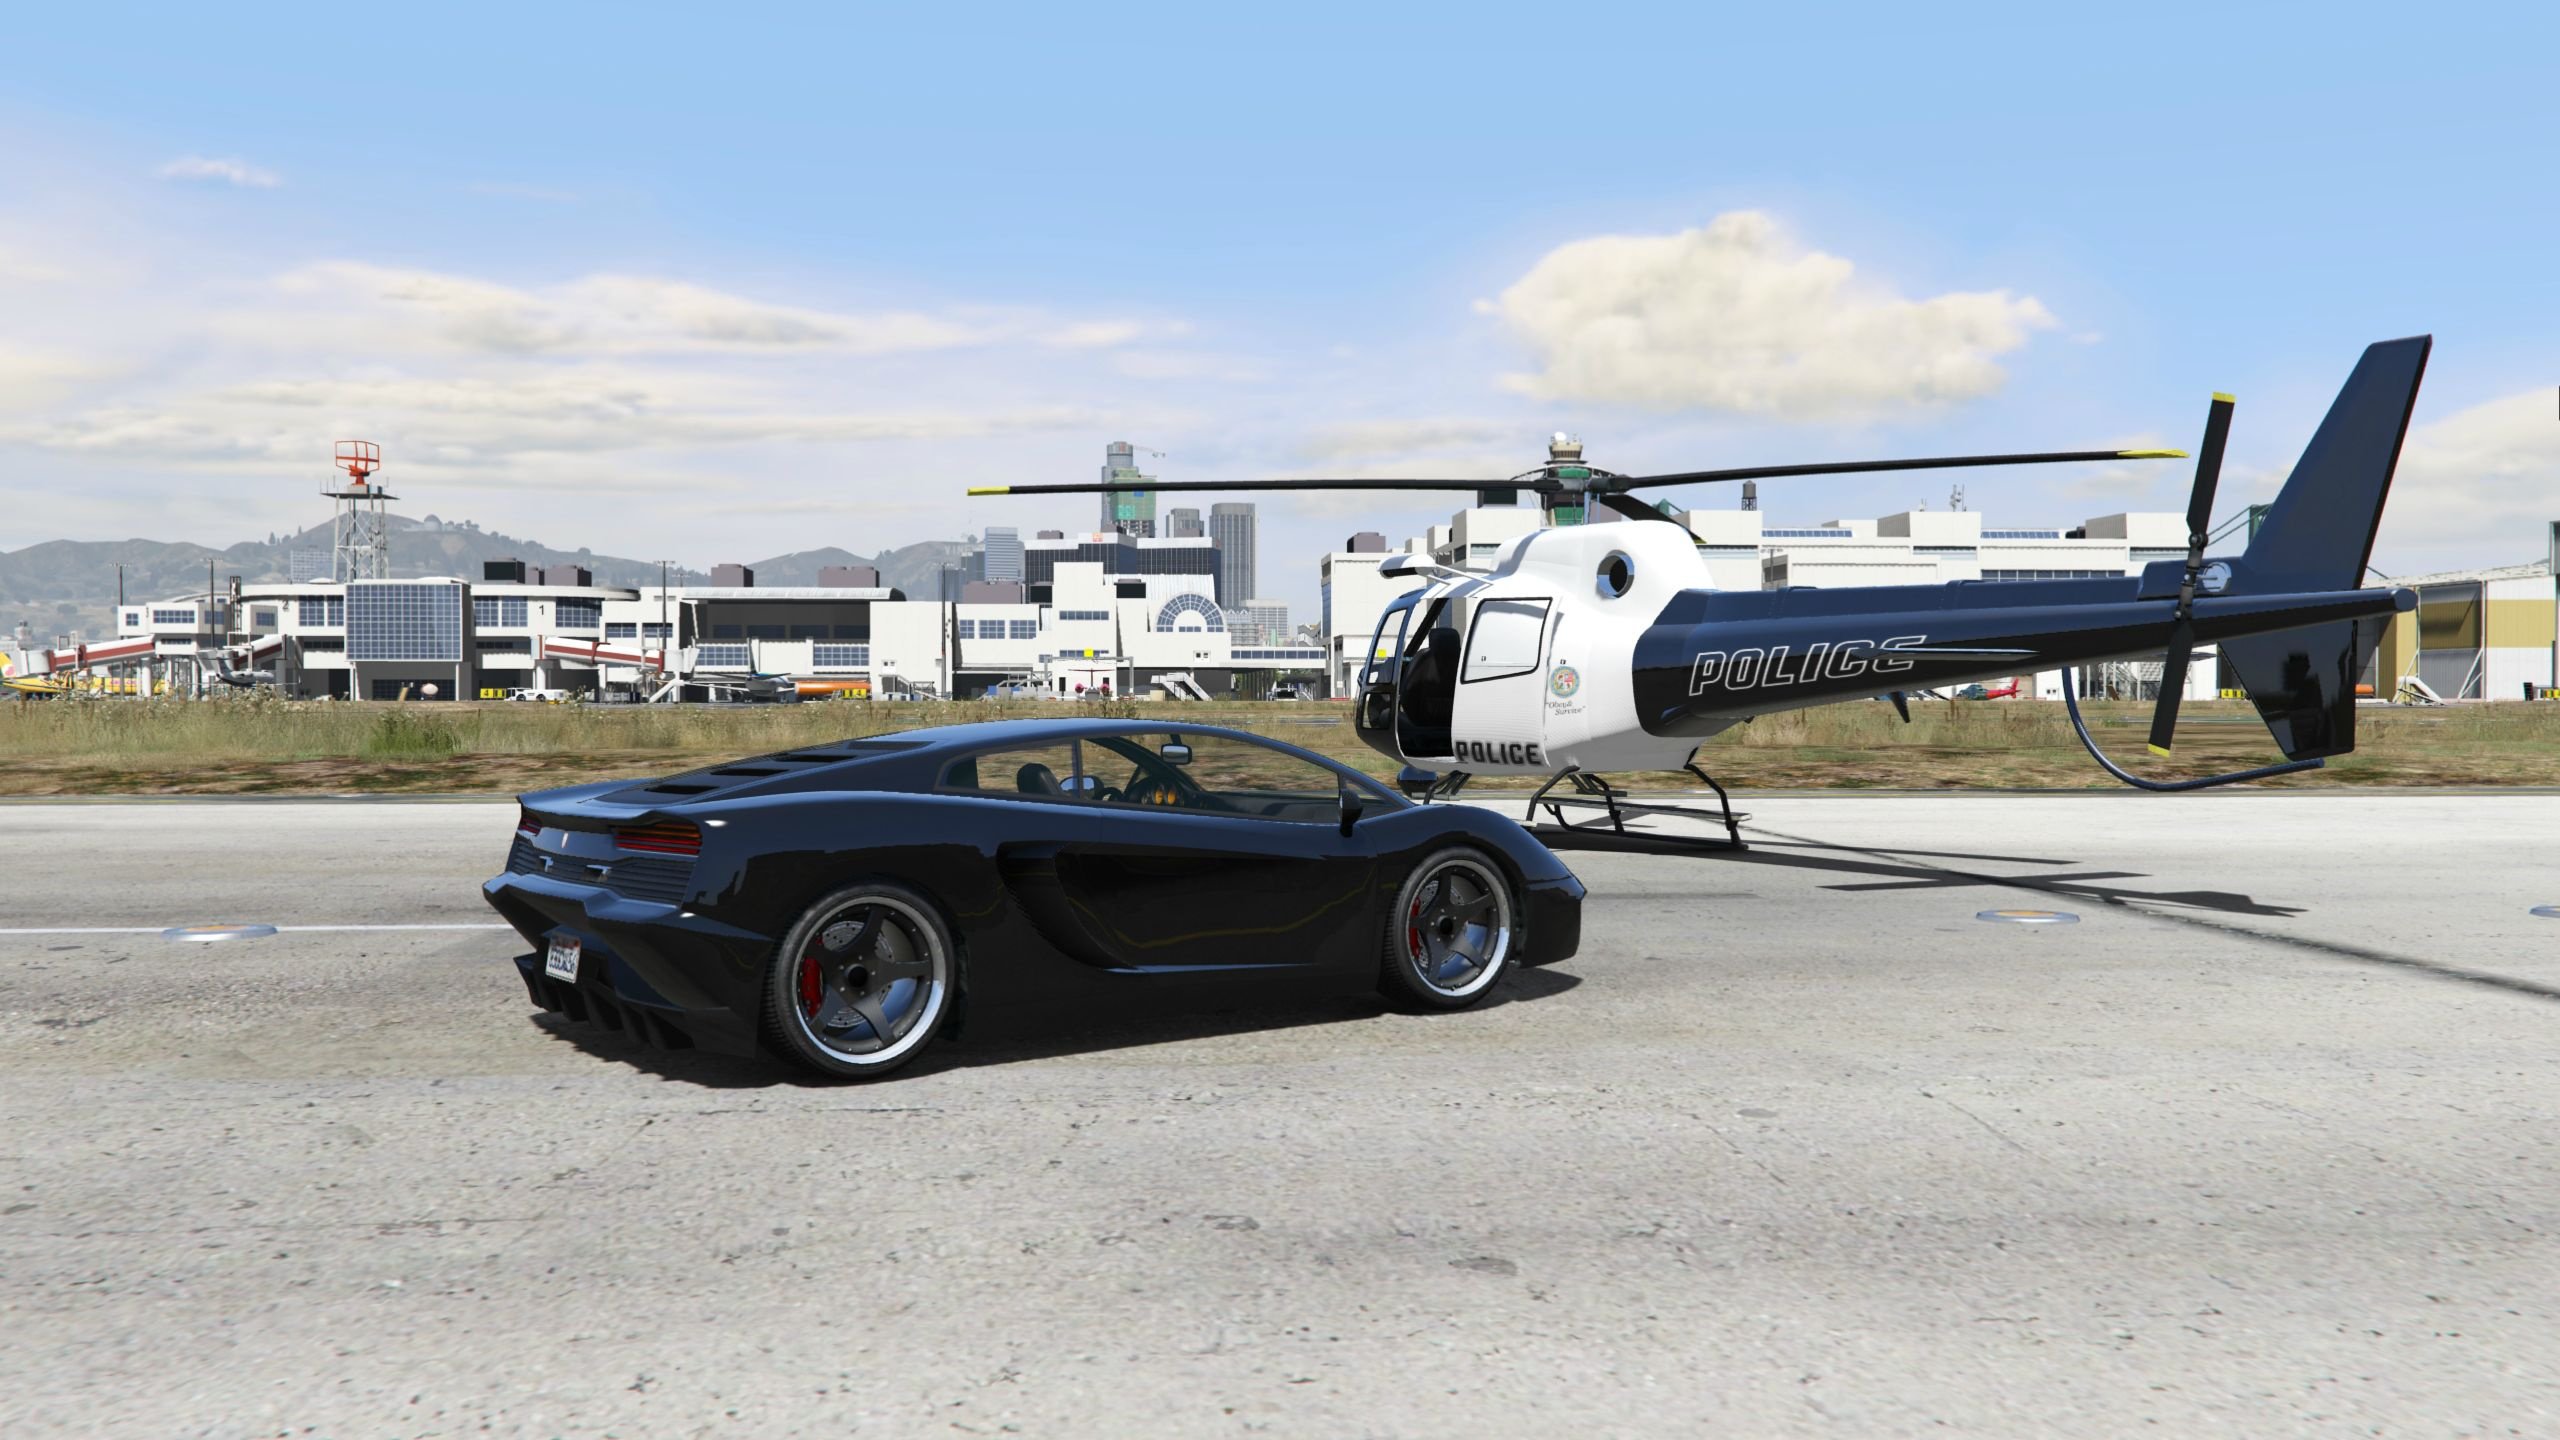 Top 5 GTA 5 visual mods for realistic graphics